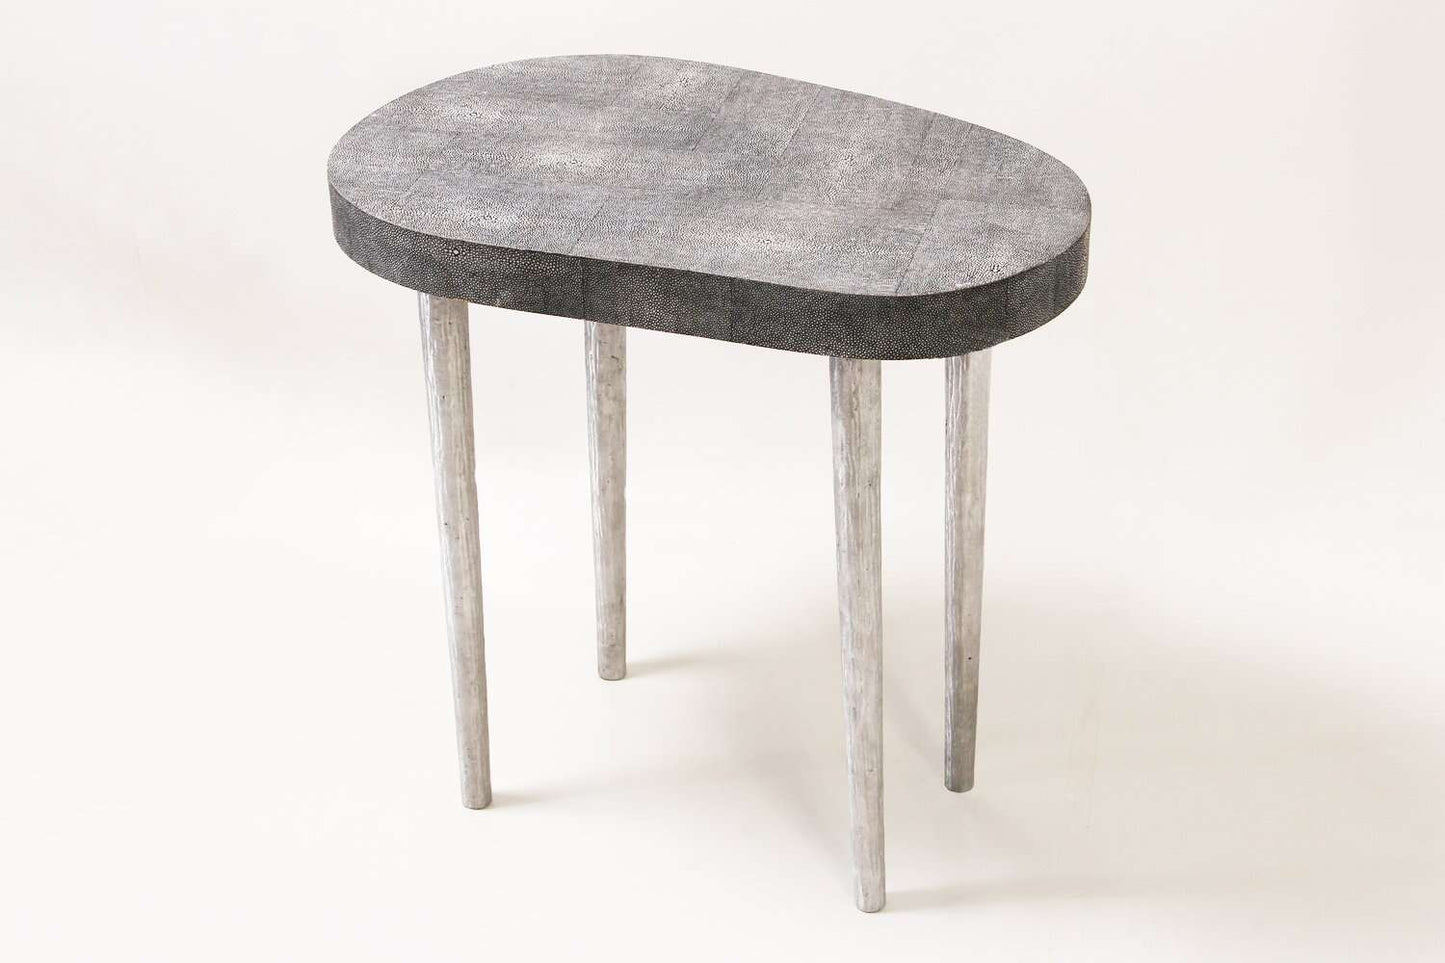 Mango Side Table in Charcoal Shagreen